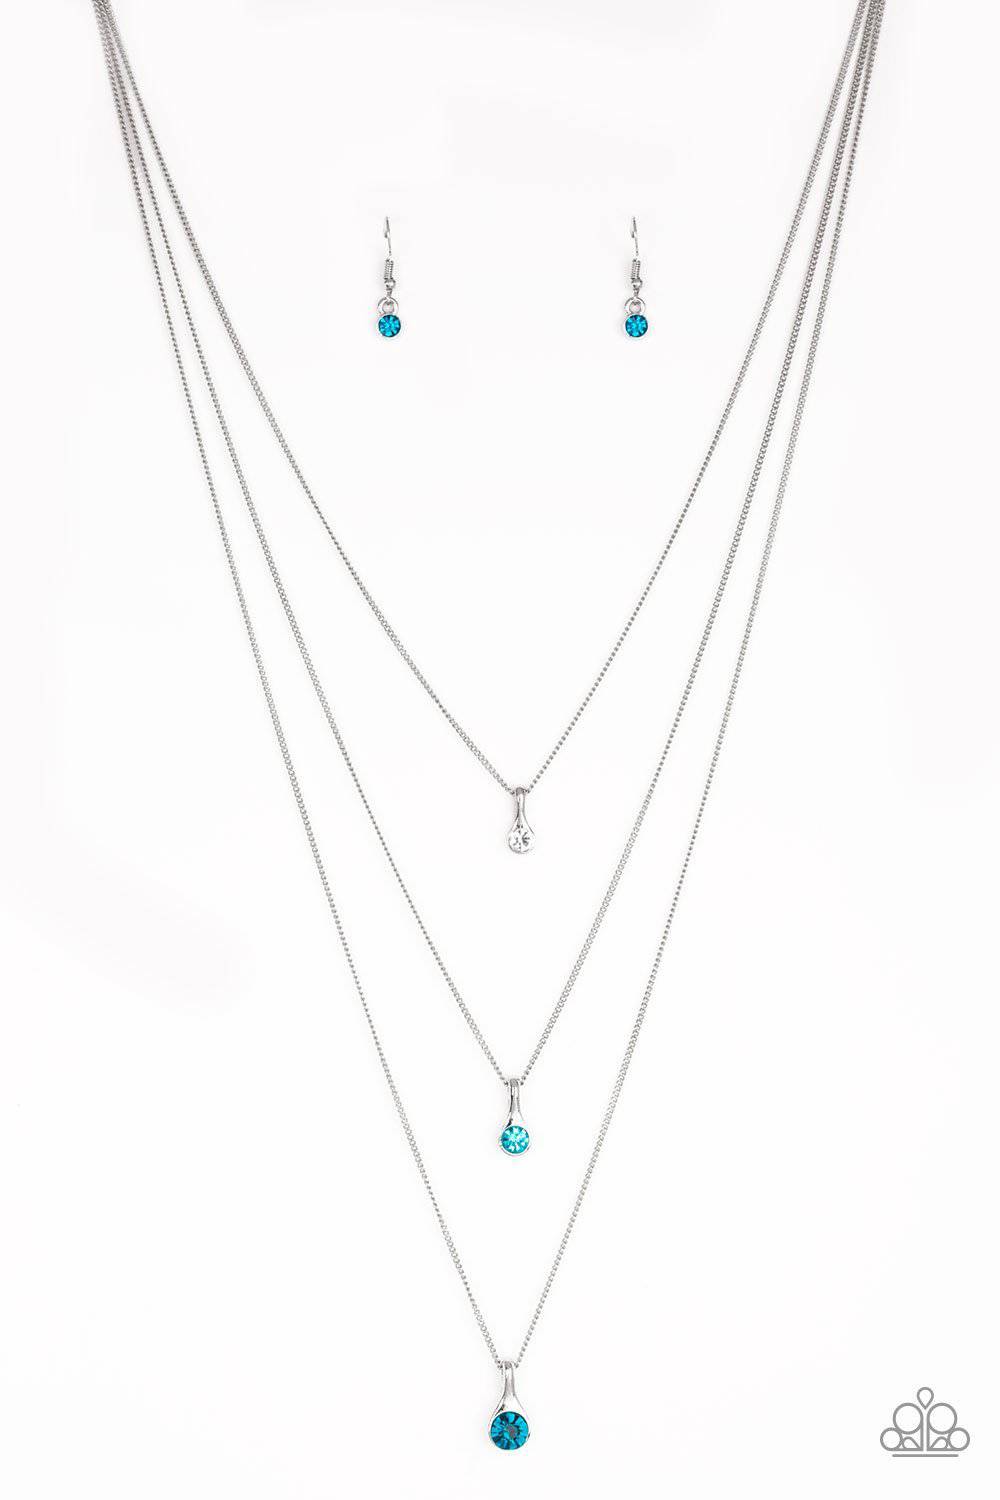 A315 - Crystal Chic Layered Necklace by Paparazzi Accessories on Fancy5Fashion.com